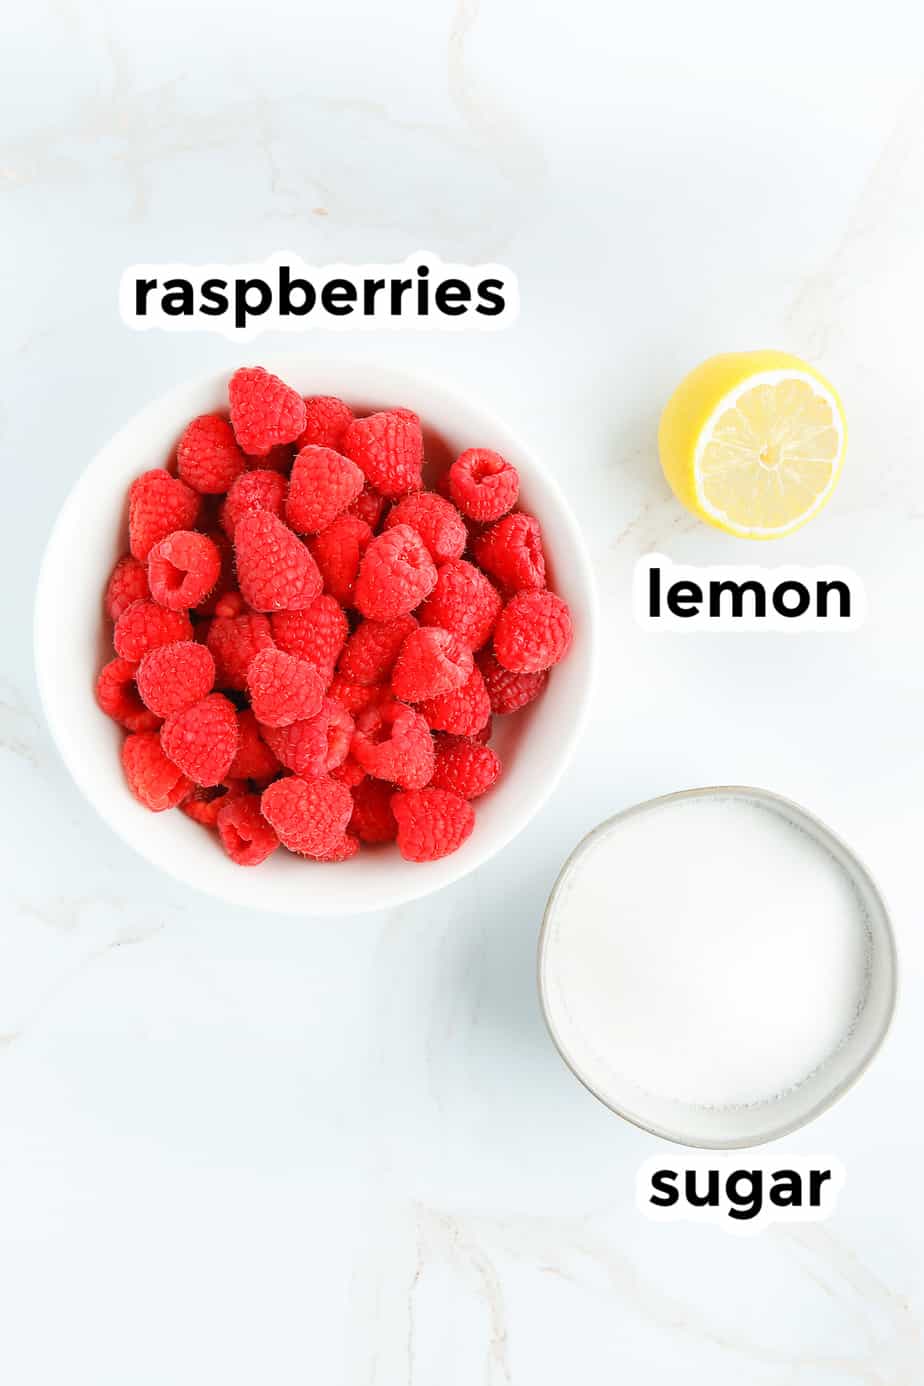 ingredients for raspberry jam in bowls on a counter with text labels